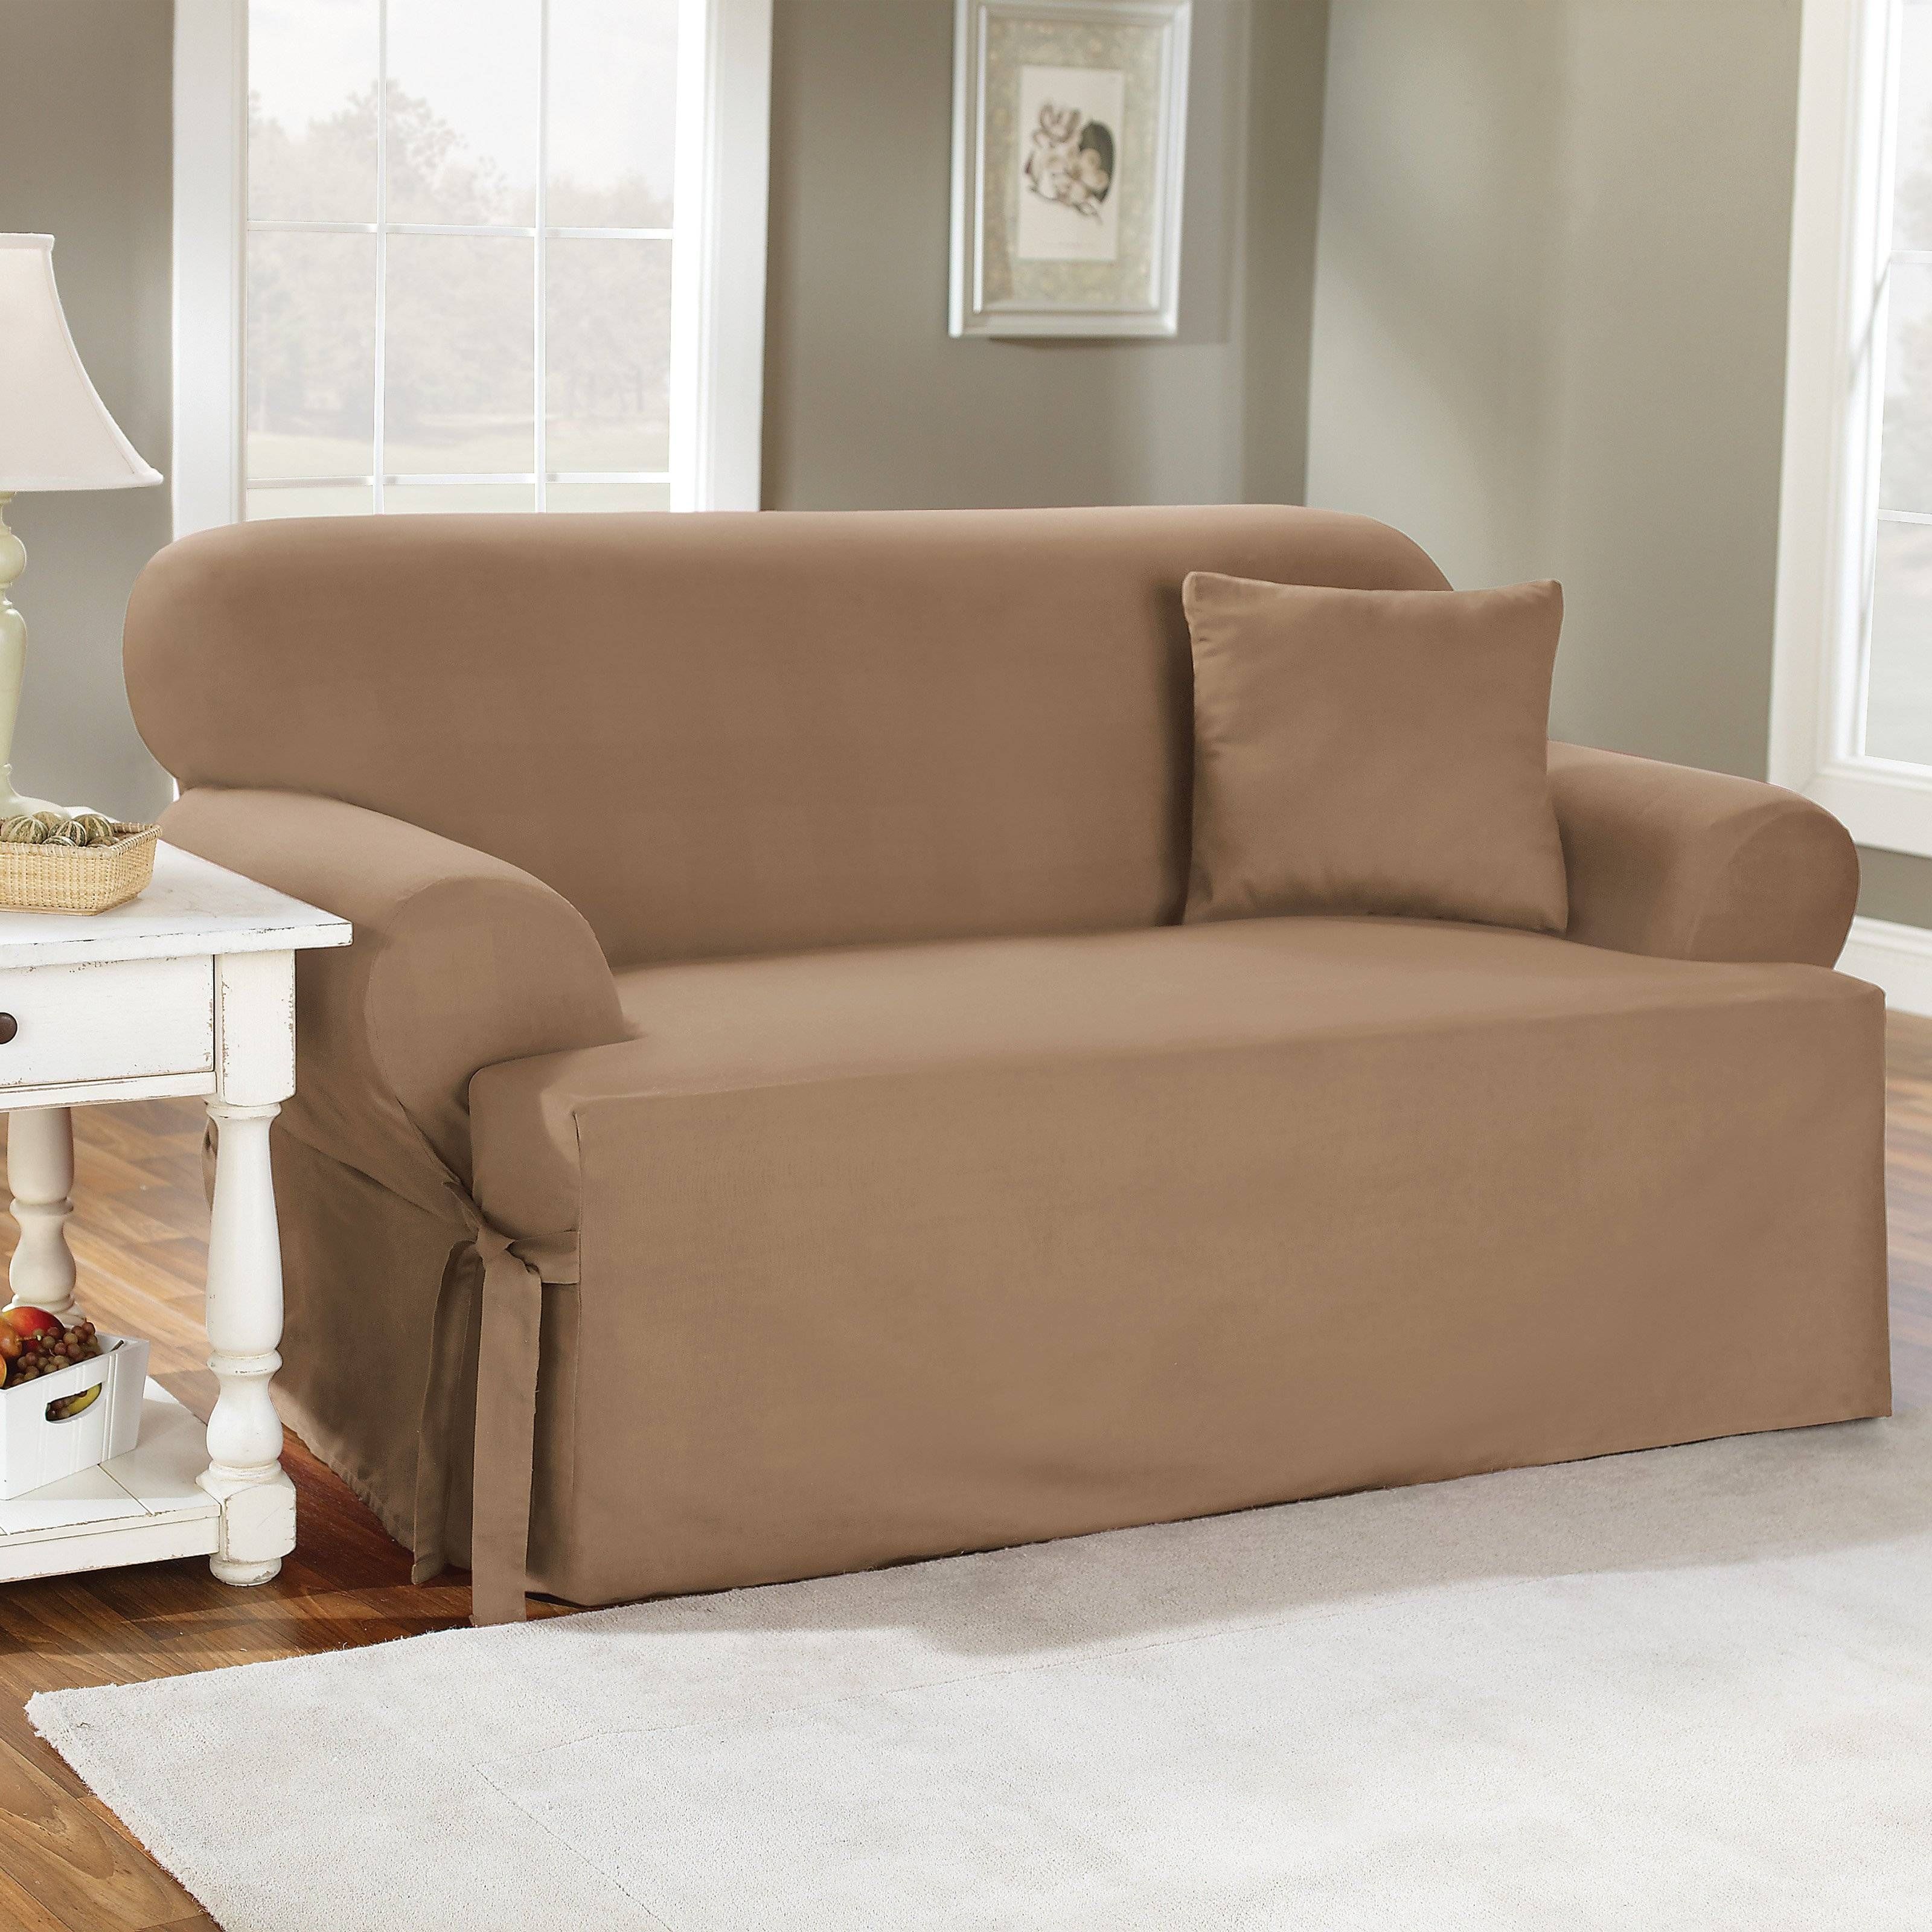 Sofa: Comfortable Slipcover For Reclining Sofa At Modern Living With Regard To Slipcover For Recliner Sofas (View 10 of 15)